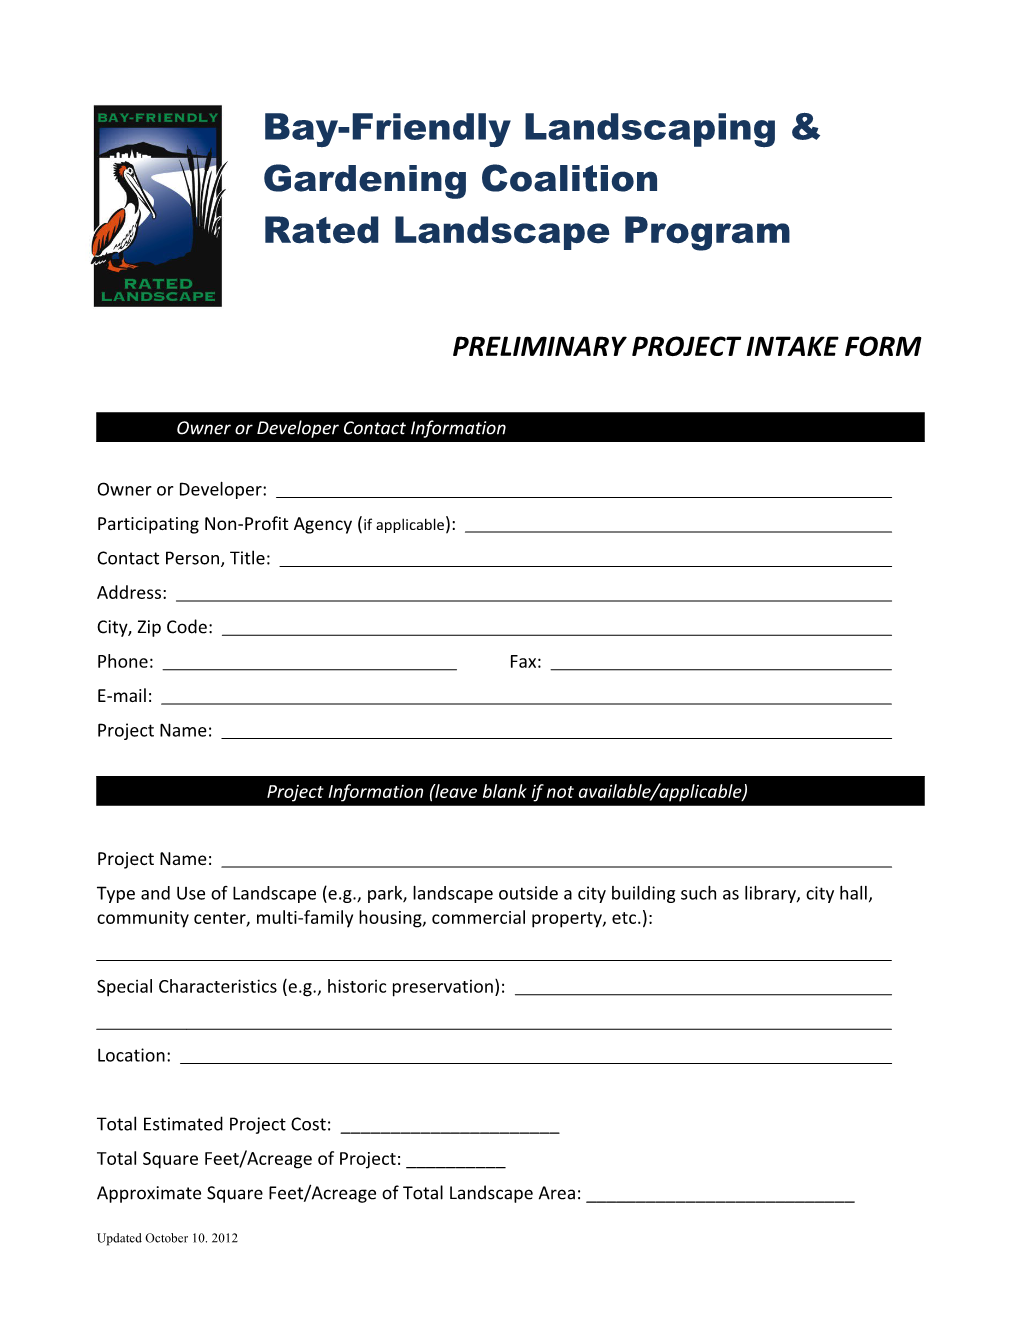 Preliminary Project Intake Form